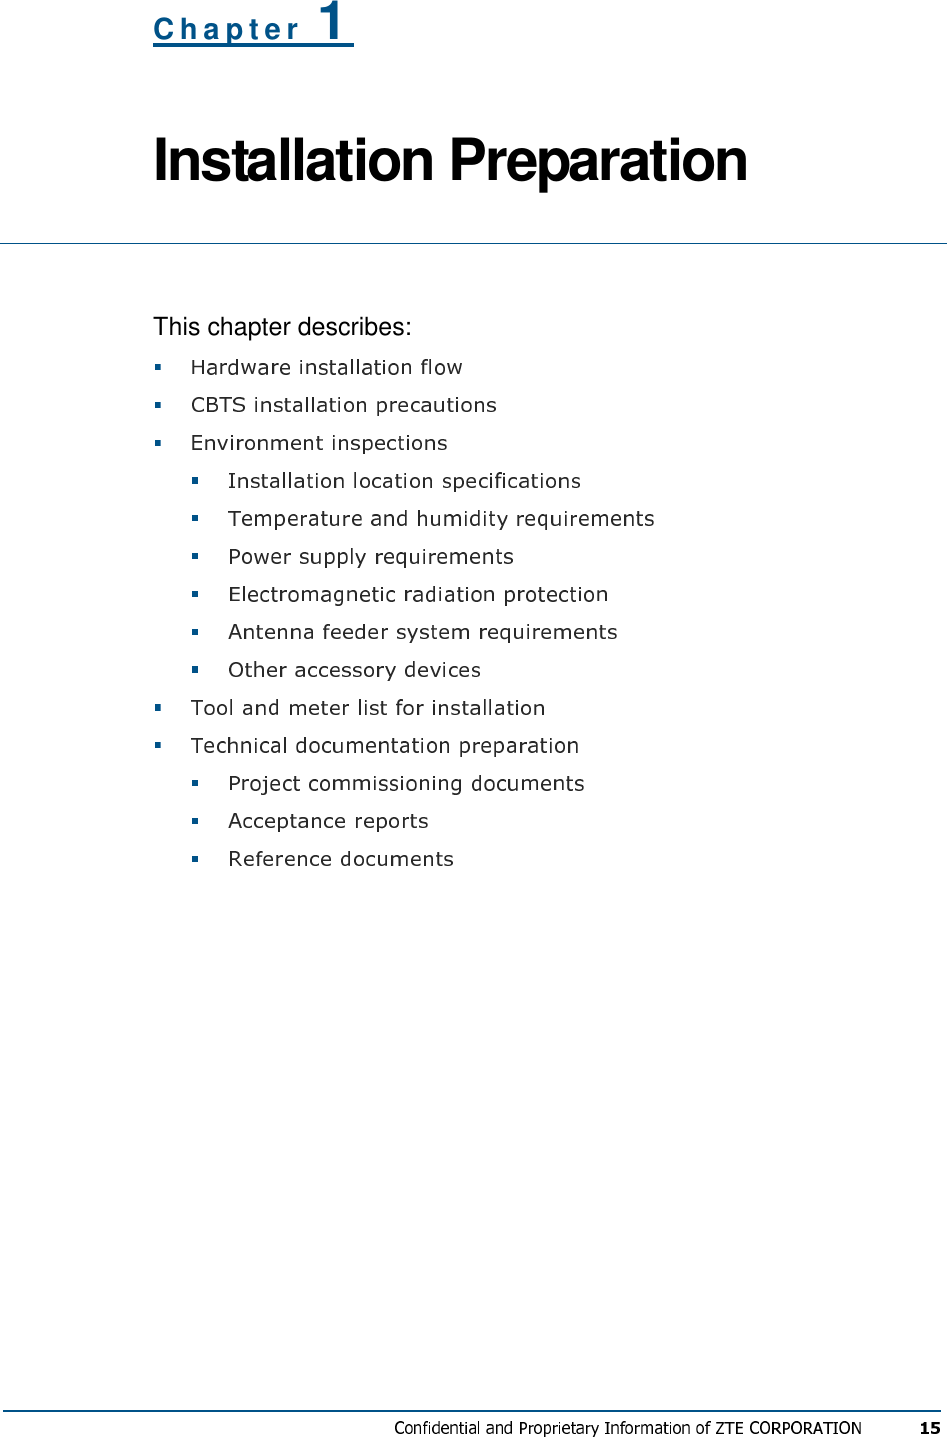 C h a p t e r   1 Installation Preparation  This chapter describes:               